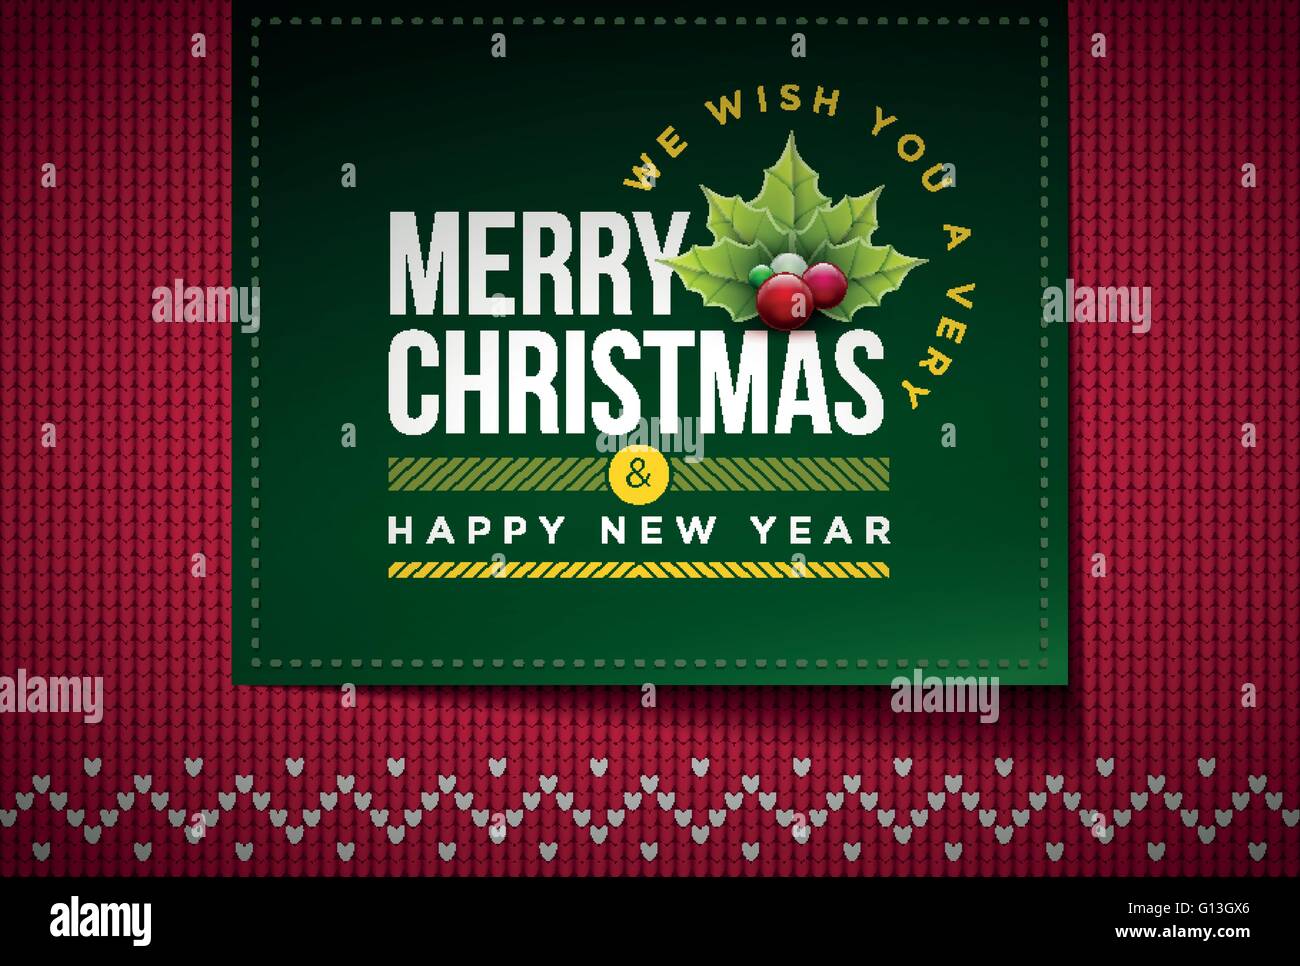 Merry Christmas and Happy New Year message on northern style vector knitted pattern. Elements are layered separately in vector Stock Vector